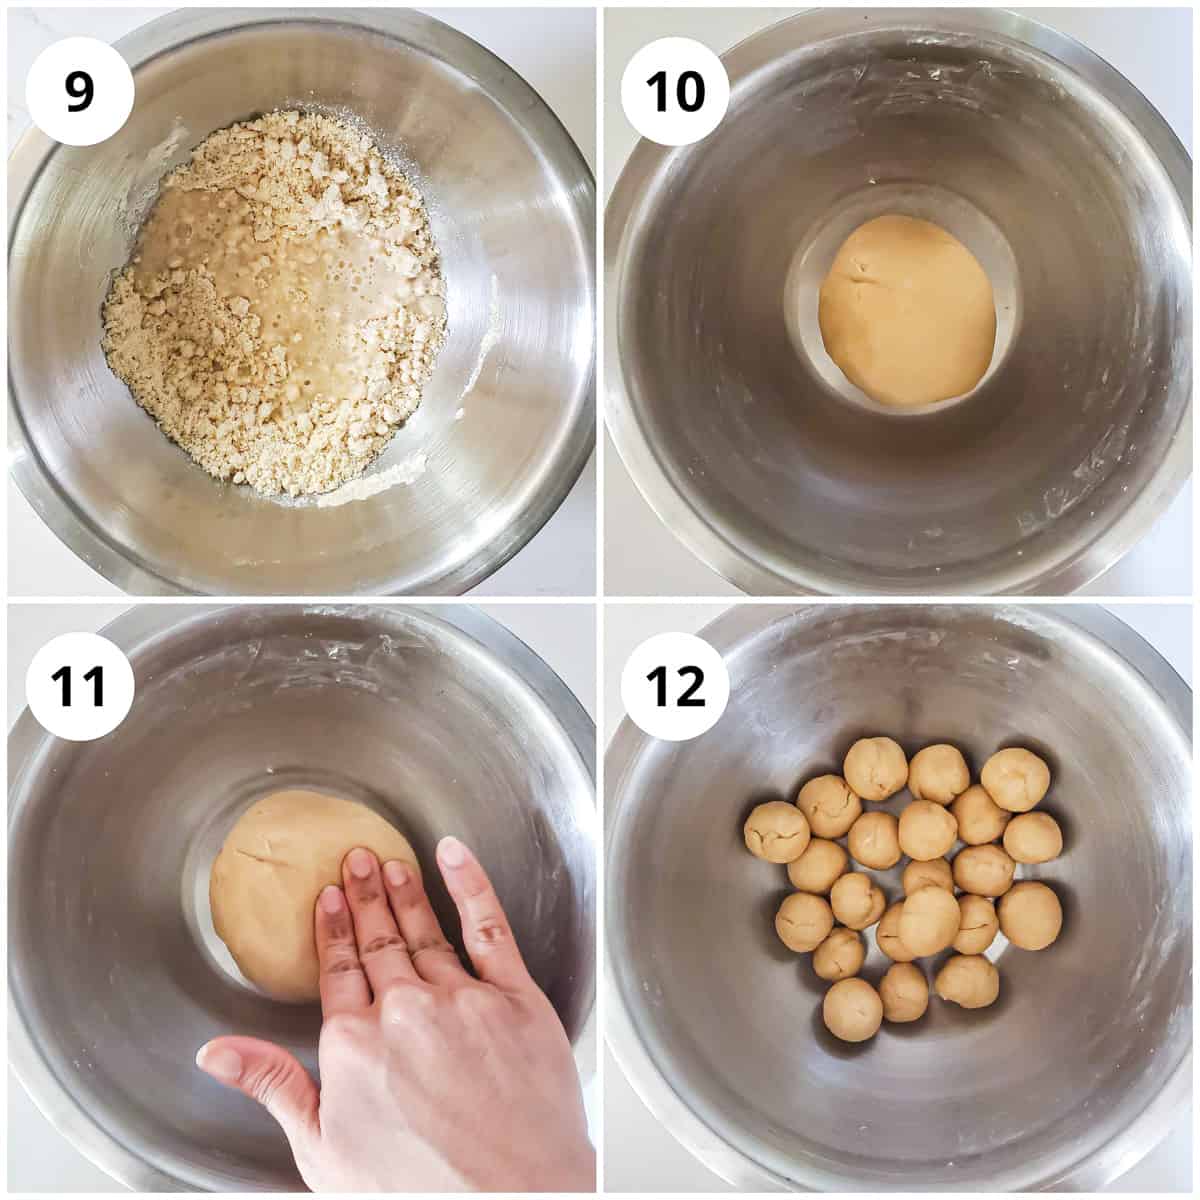 Steps for kneading the dough and making balls.